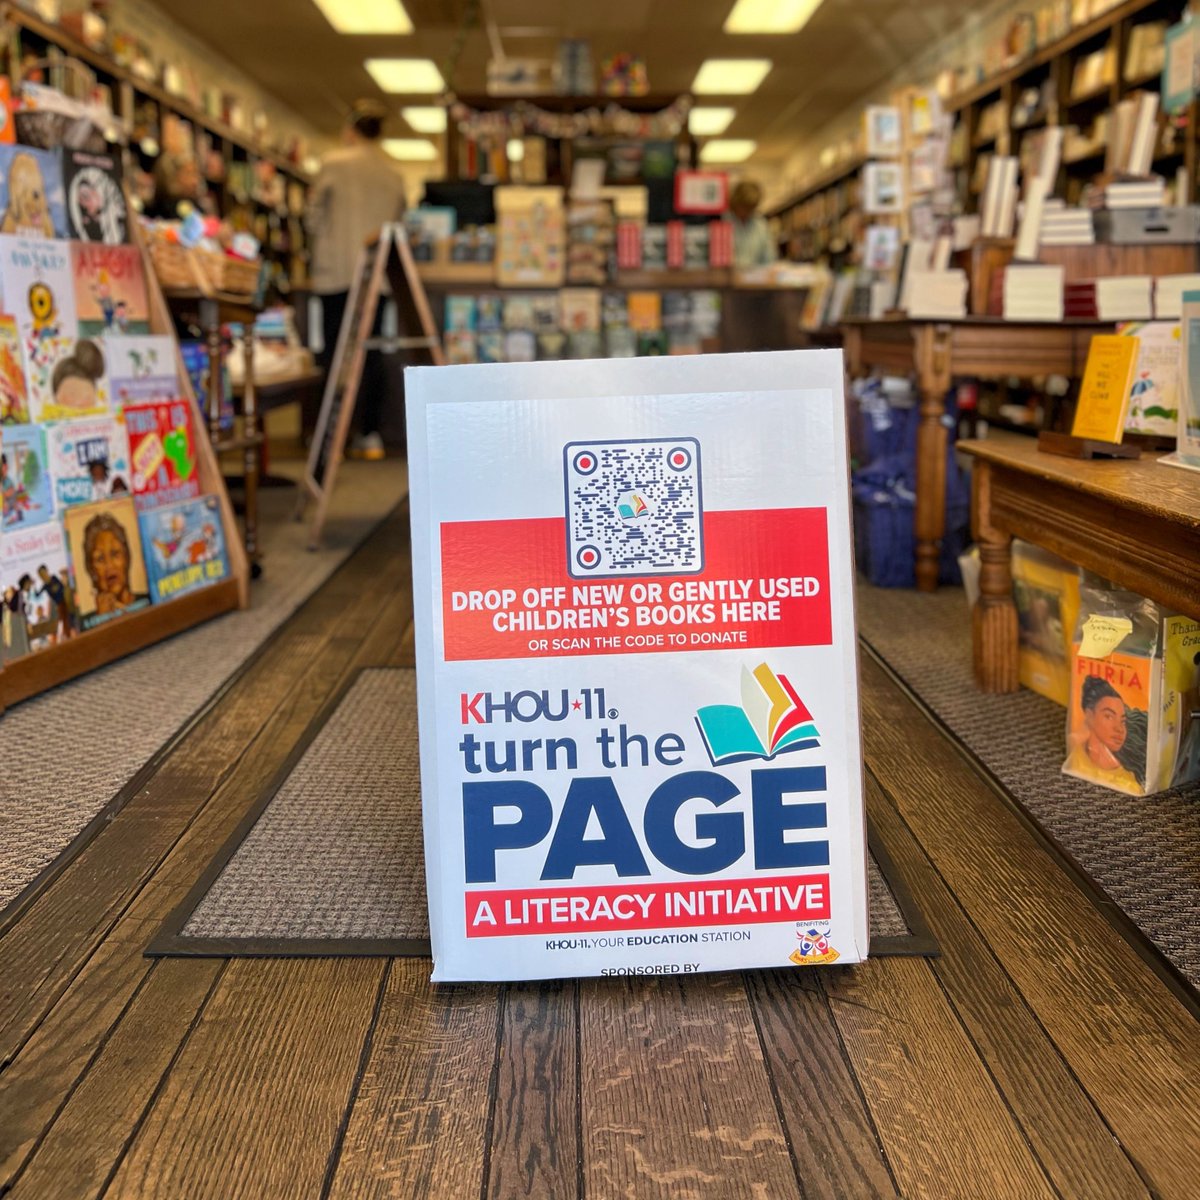 📣 The @KHOU Turn the Page Book Drive, benefitting @BooksBtnKids, is happening now! Stop by the bookshop through April 19 to drop off new & gently used books for elementary-aged readers. You can also purchase books to donate or make a monetary donation! khou.com/article/news/e…